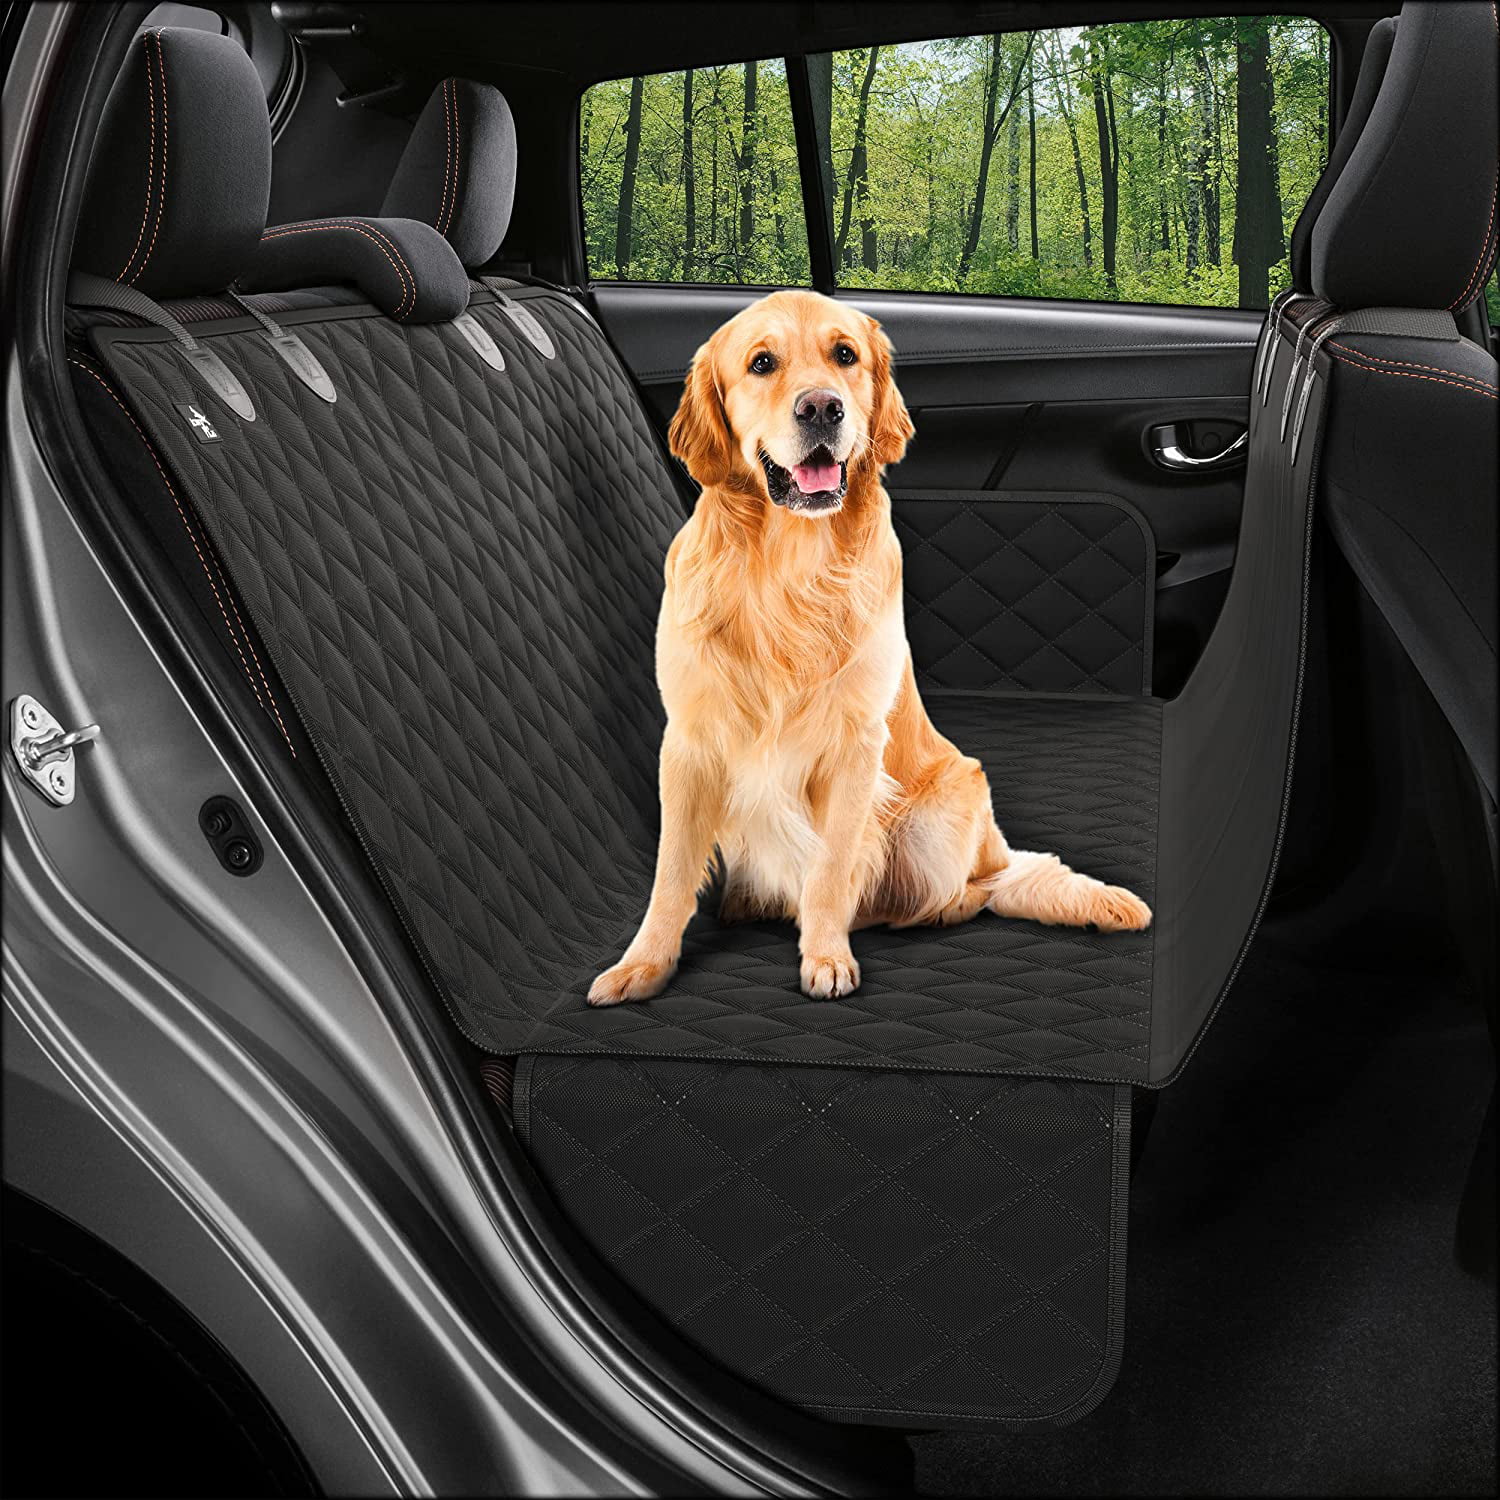 100% Waterproof with Mesh Window Car Seat Covers for Dogs ［Upgraded Version］ Dog Seat Cover for Back Seat Scratch Proof Nonslip Dog Car Hammock Dog Backseat Cover for Cars Trucks SU 